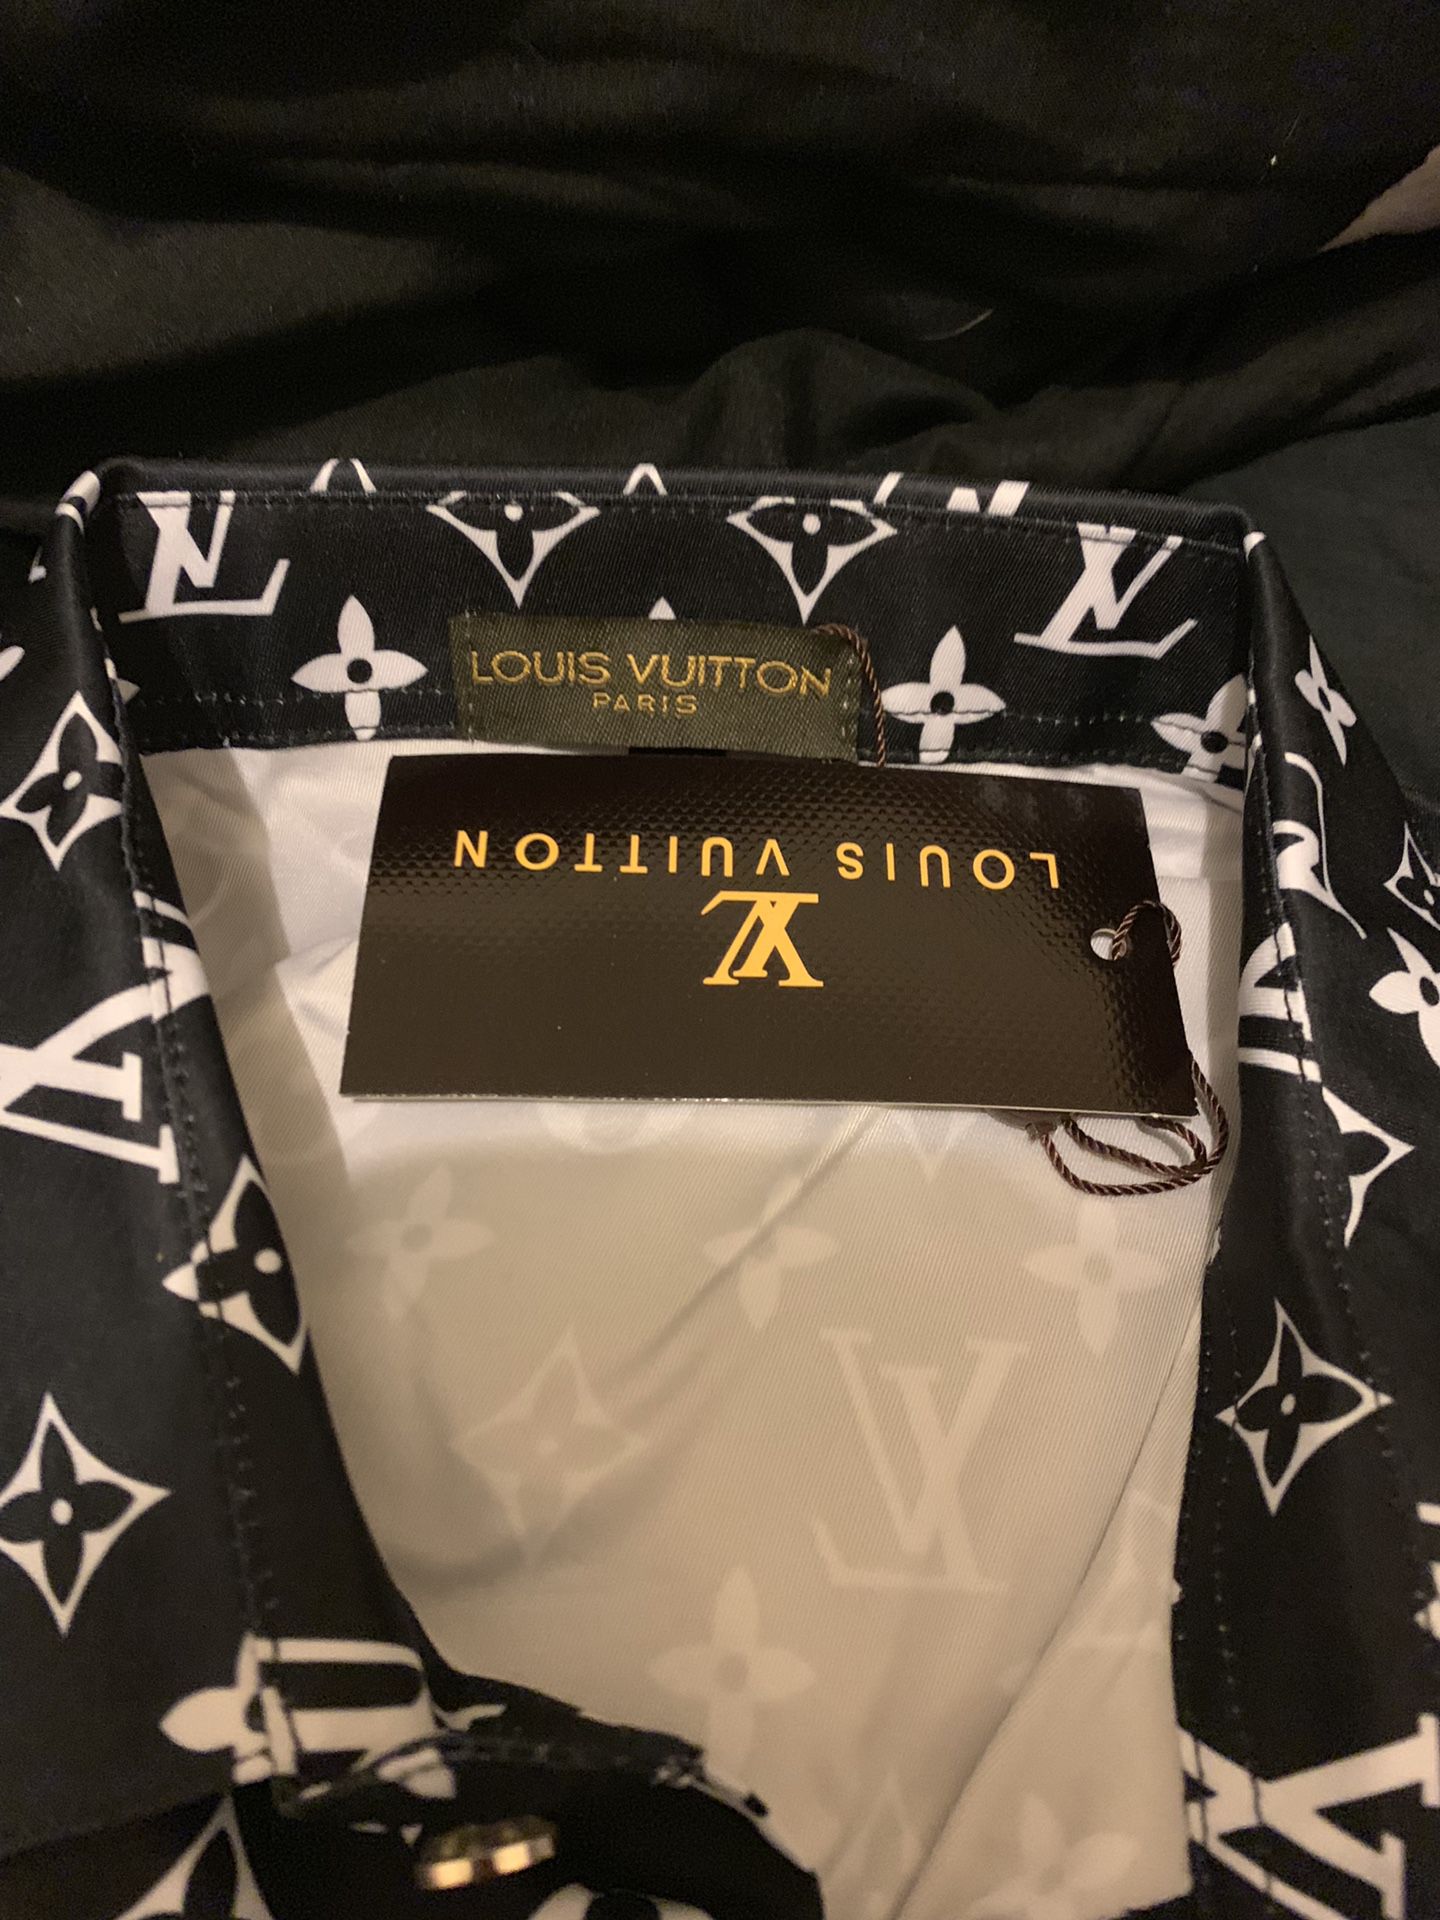 Louis Vuitton Shirt and Shoes for Sale in Dearborn Heights, MI - OfferUp